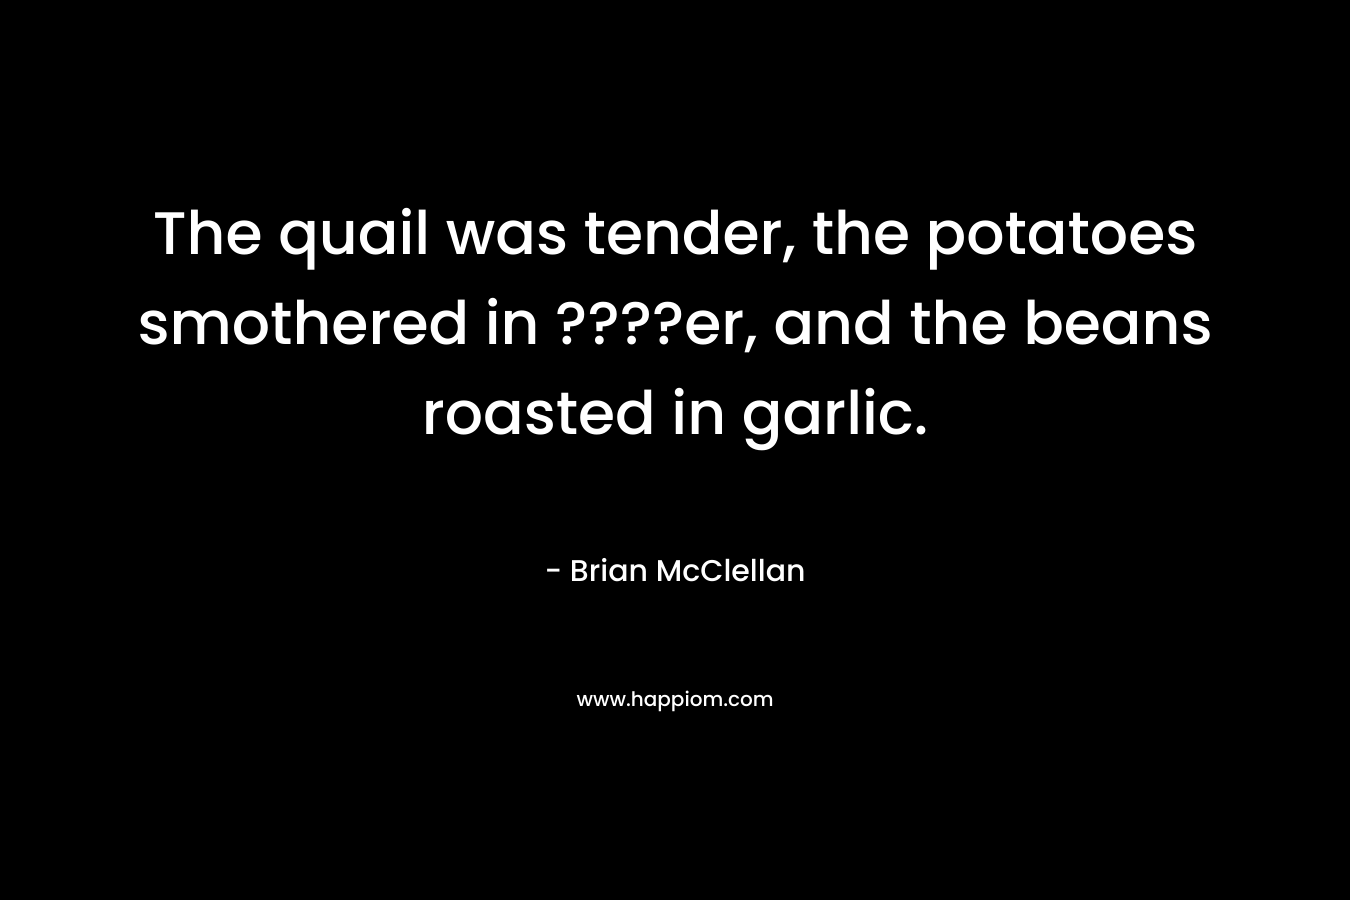 The quail was tender, the potatoes smothered in ????er, and the beans roasted in garlic. – Brian  McClellan